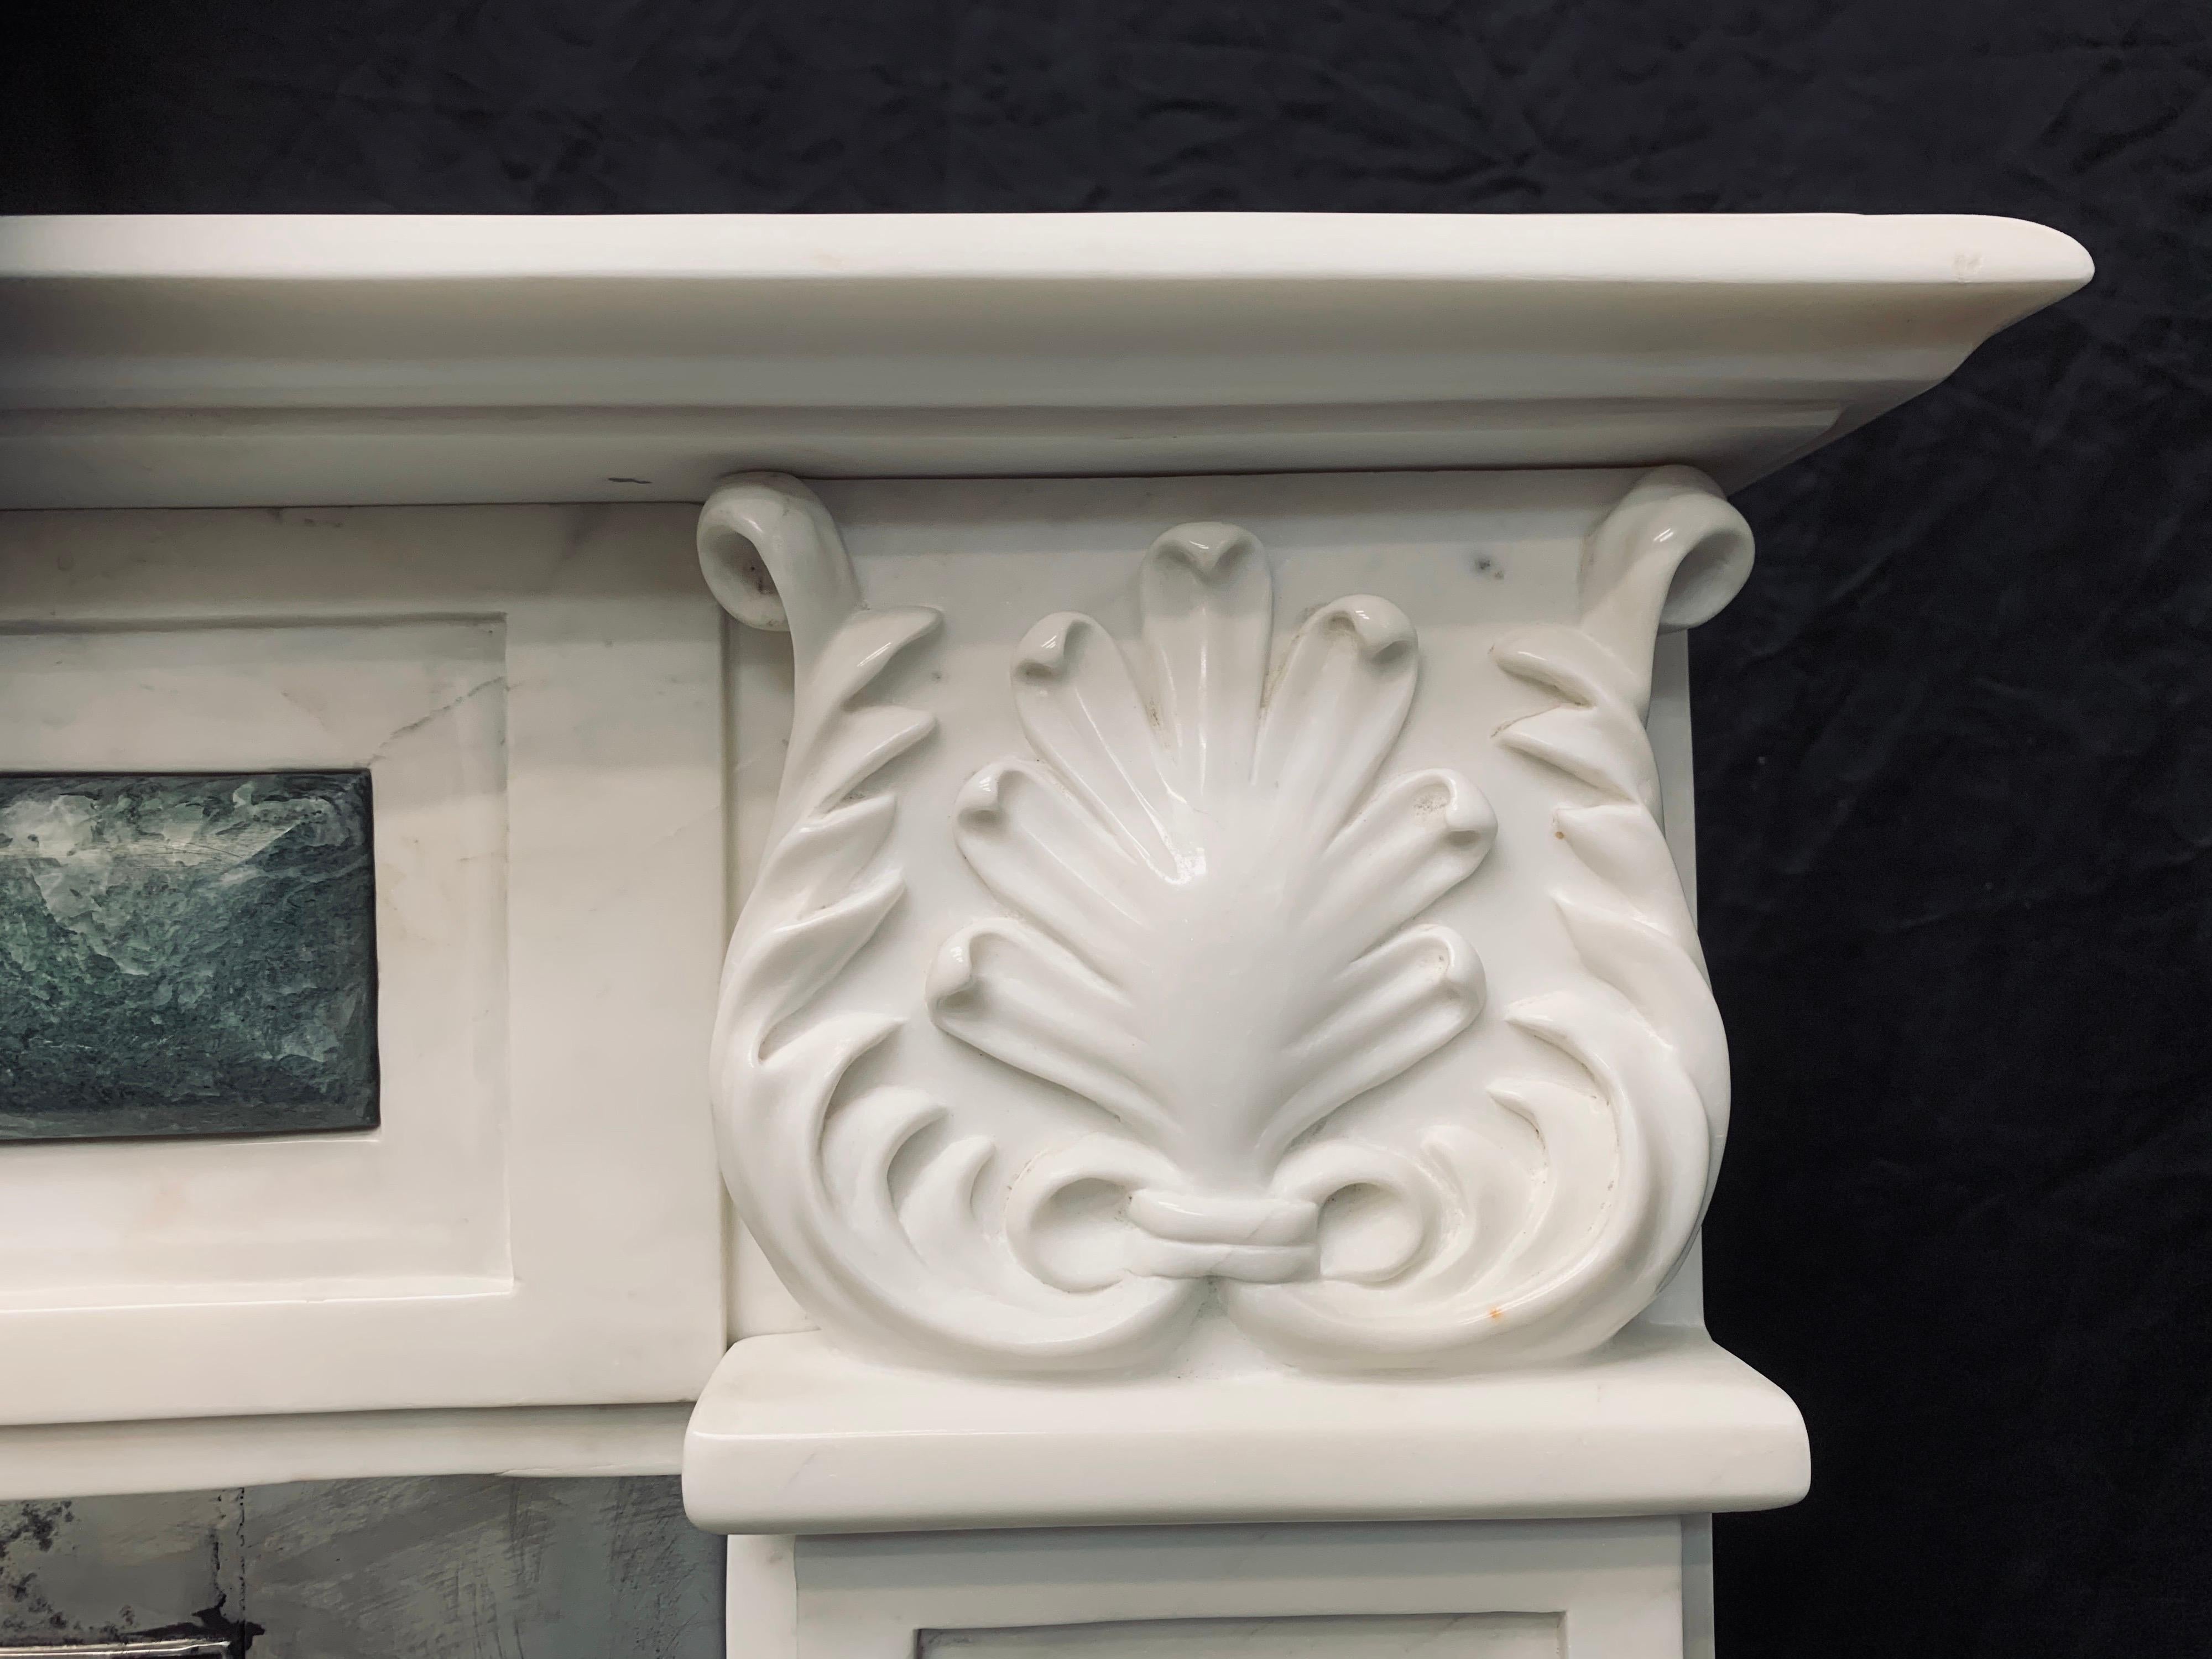 Carved Period White Statuary Marble Fireplace Surround in the Regency Revival Manner